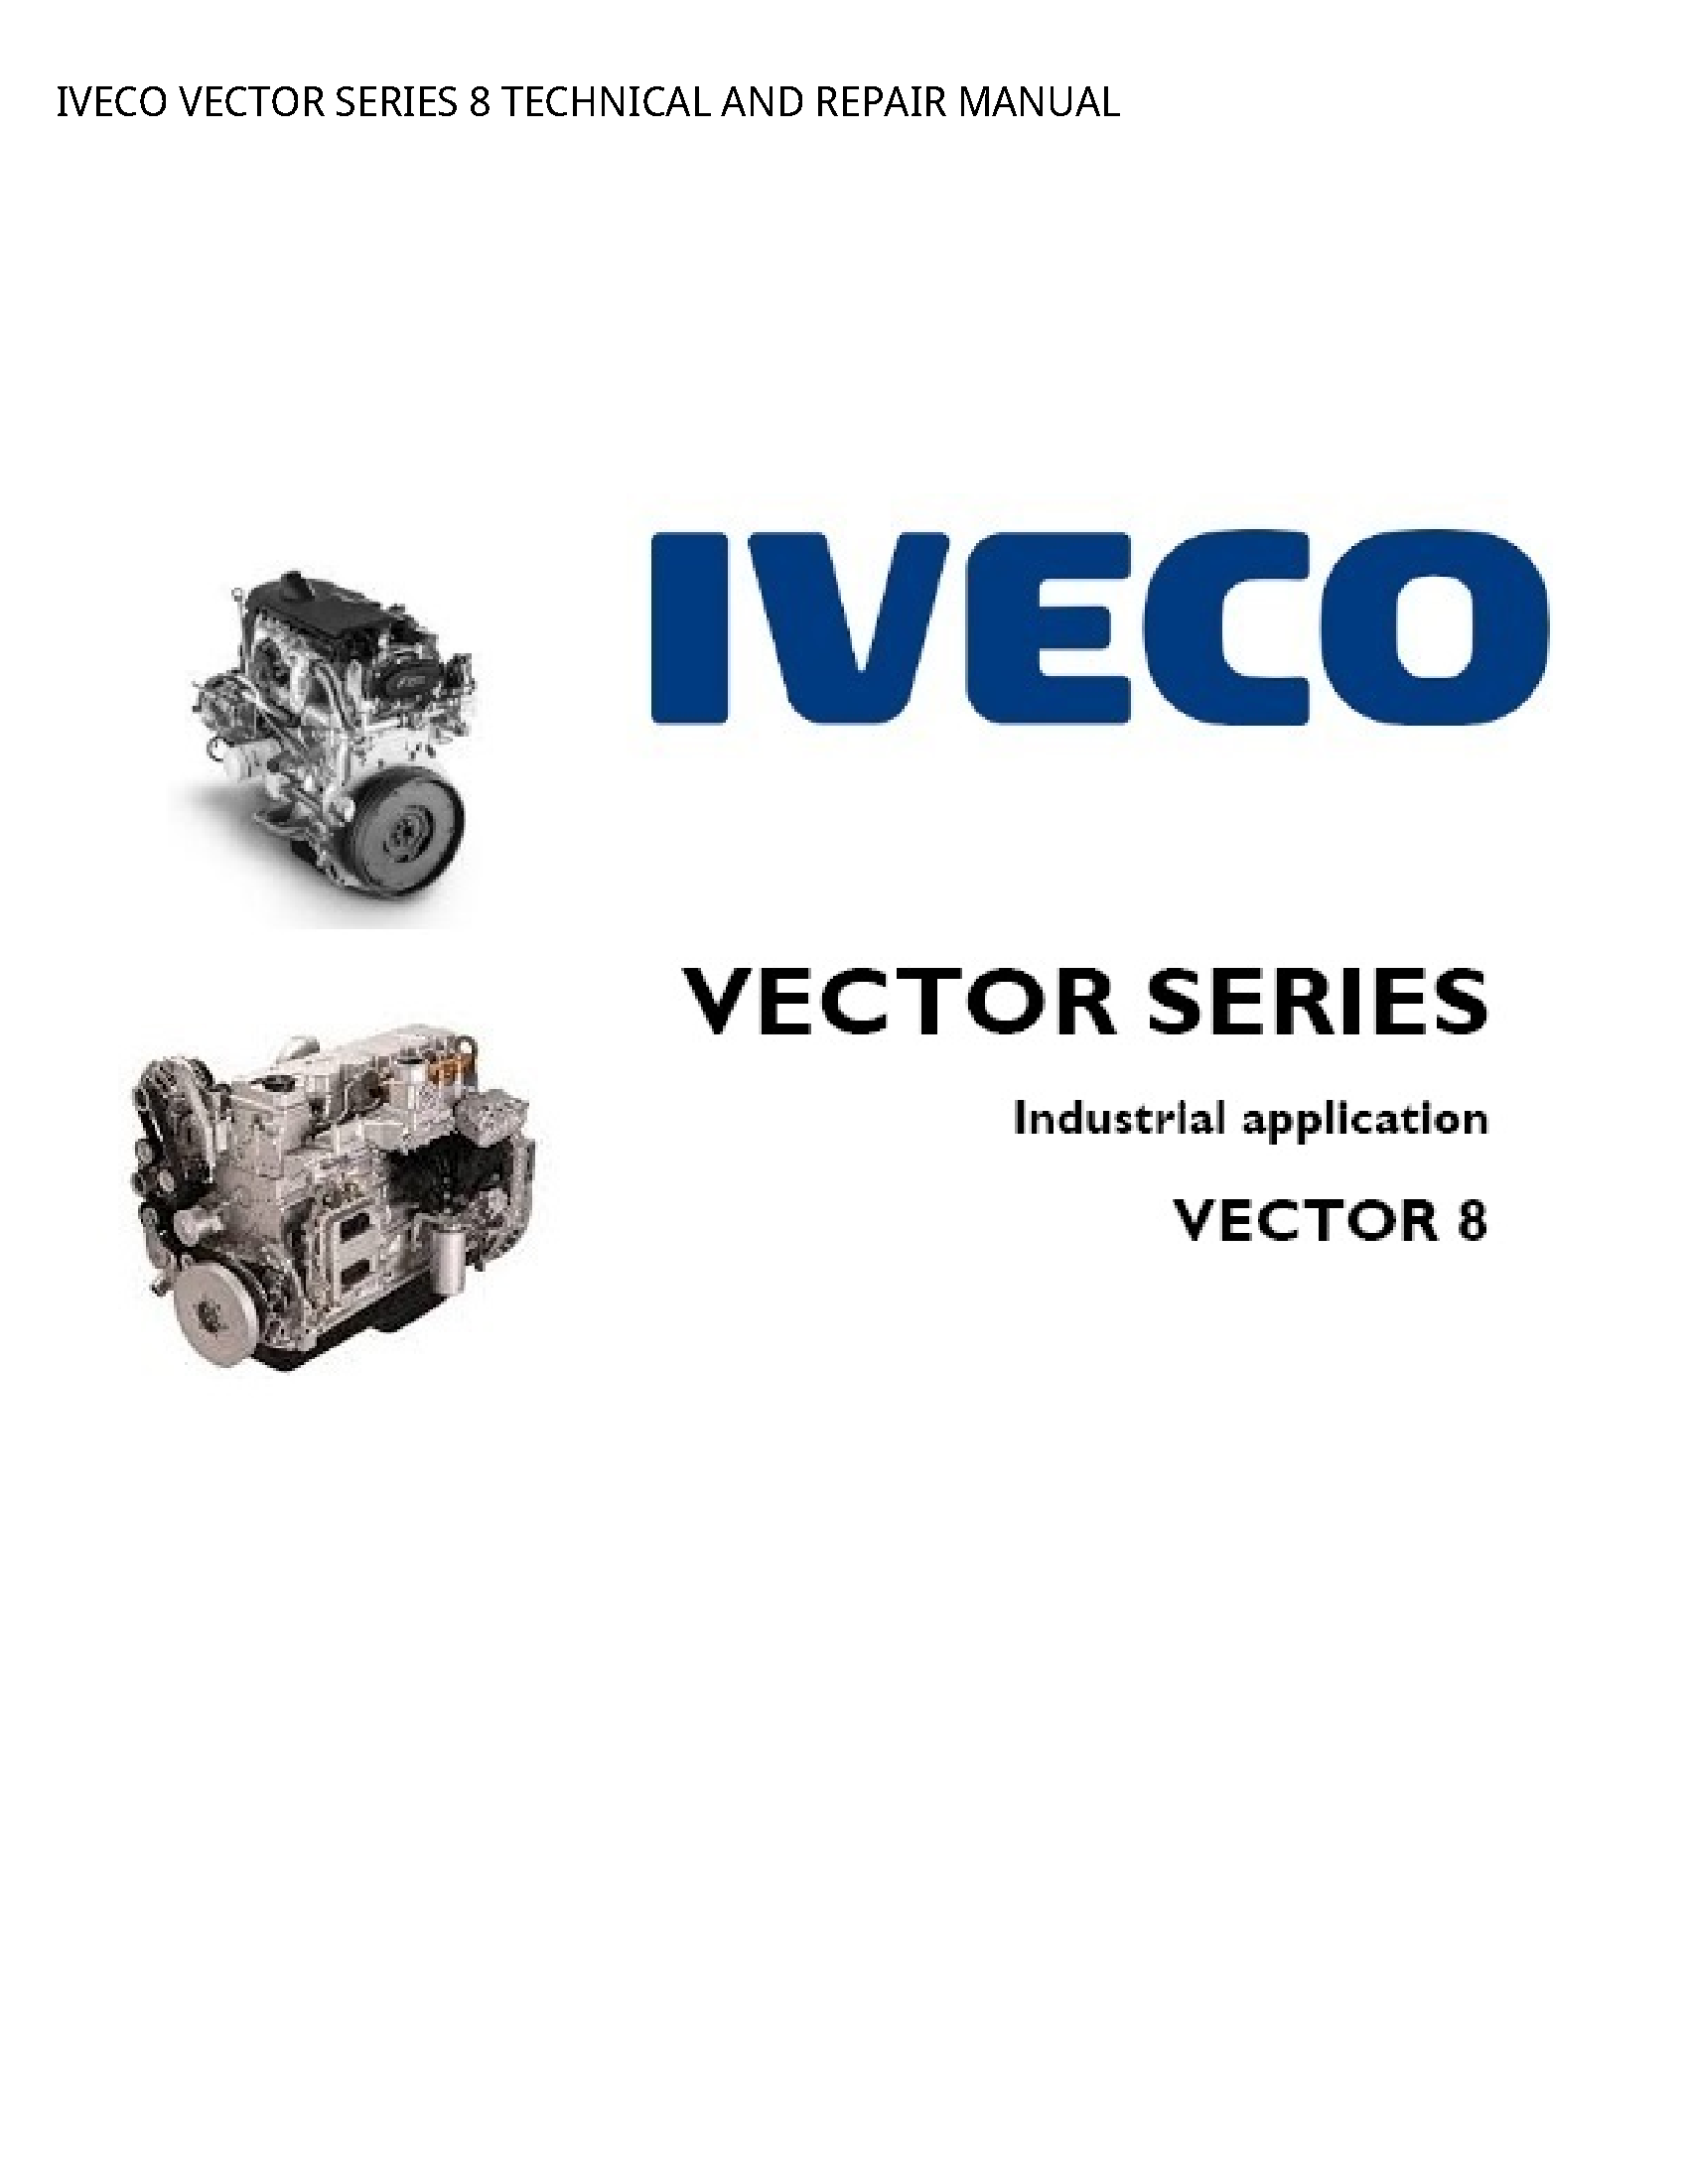 Iveco 8 VECTOR SERIES TECHNICAL AND REPAIR manual